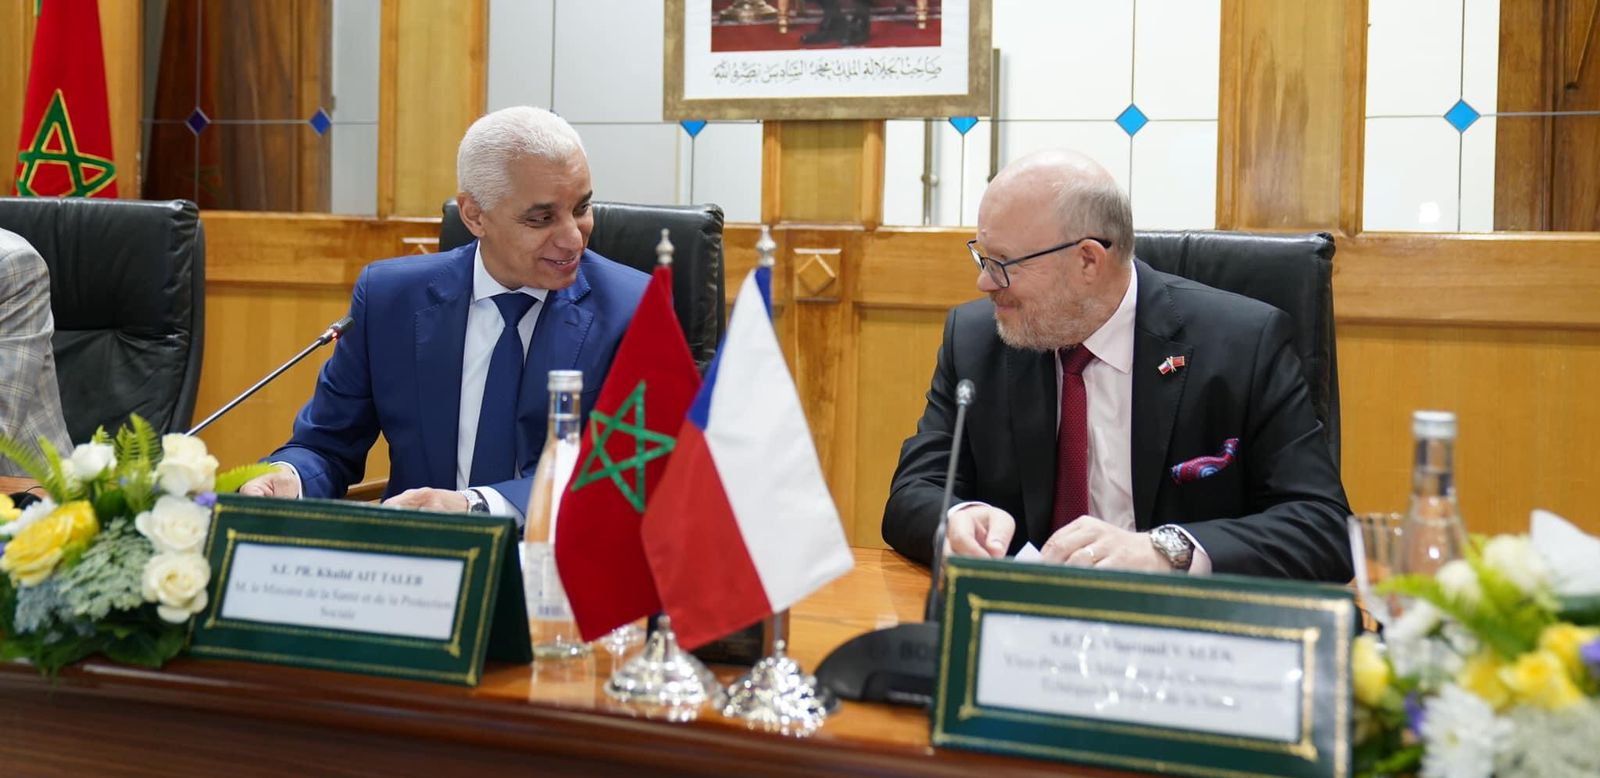 The Minister of Health and Social Protection, Khalid Ait Taleb, held talks on May 6 in Rabat with his Czech counterpart, Vlastimil Válek